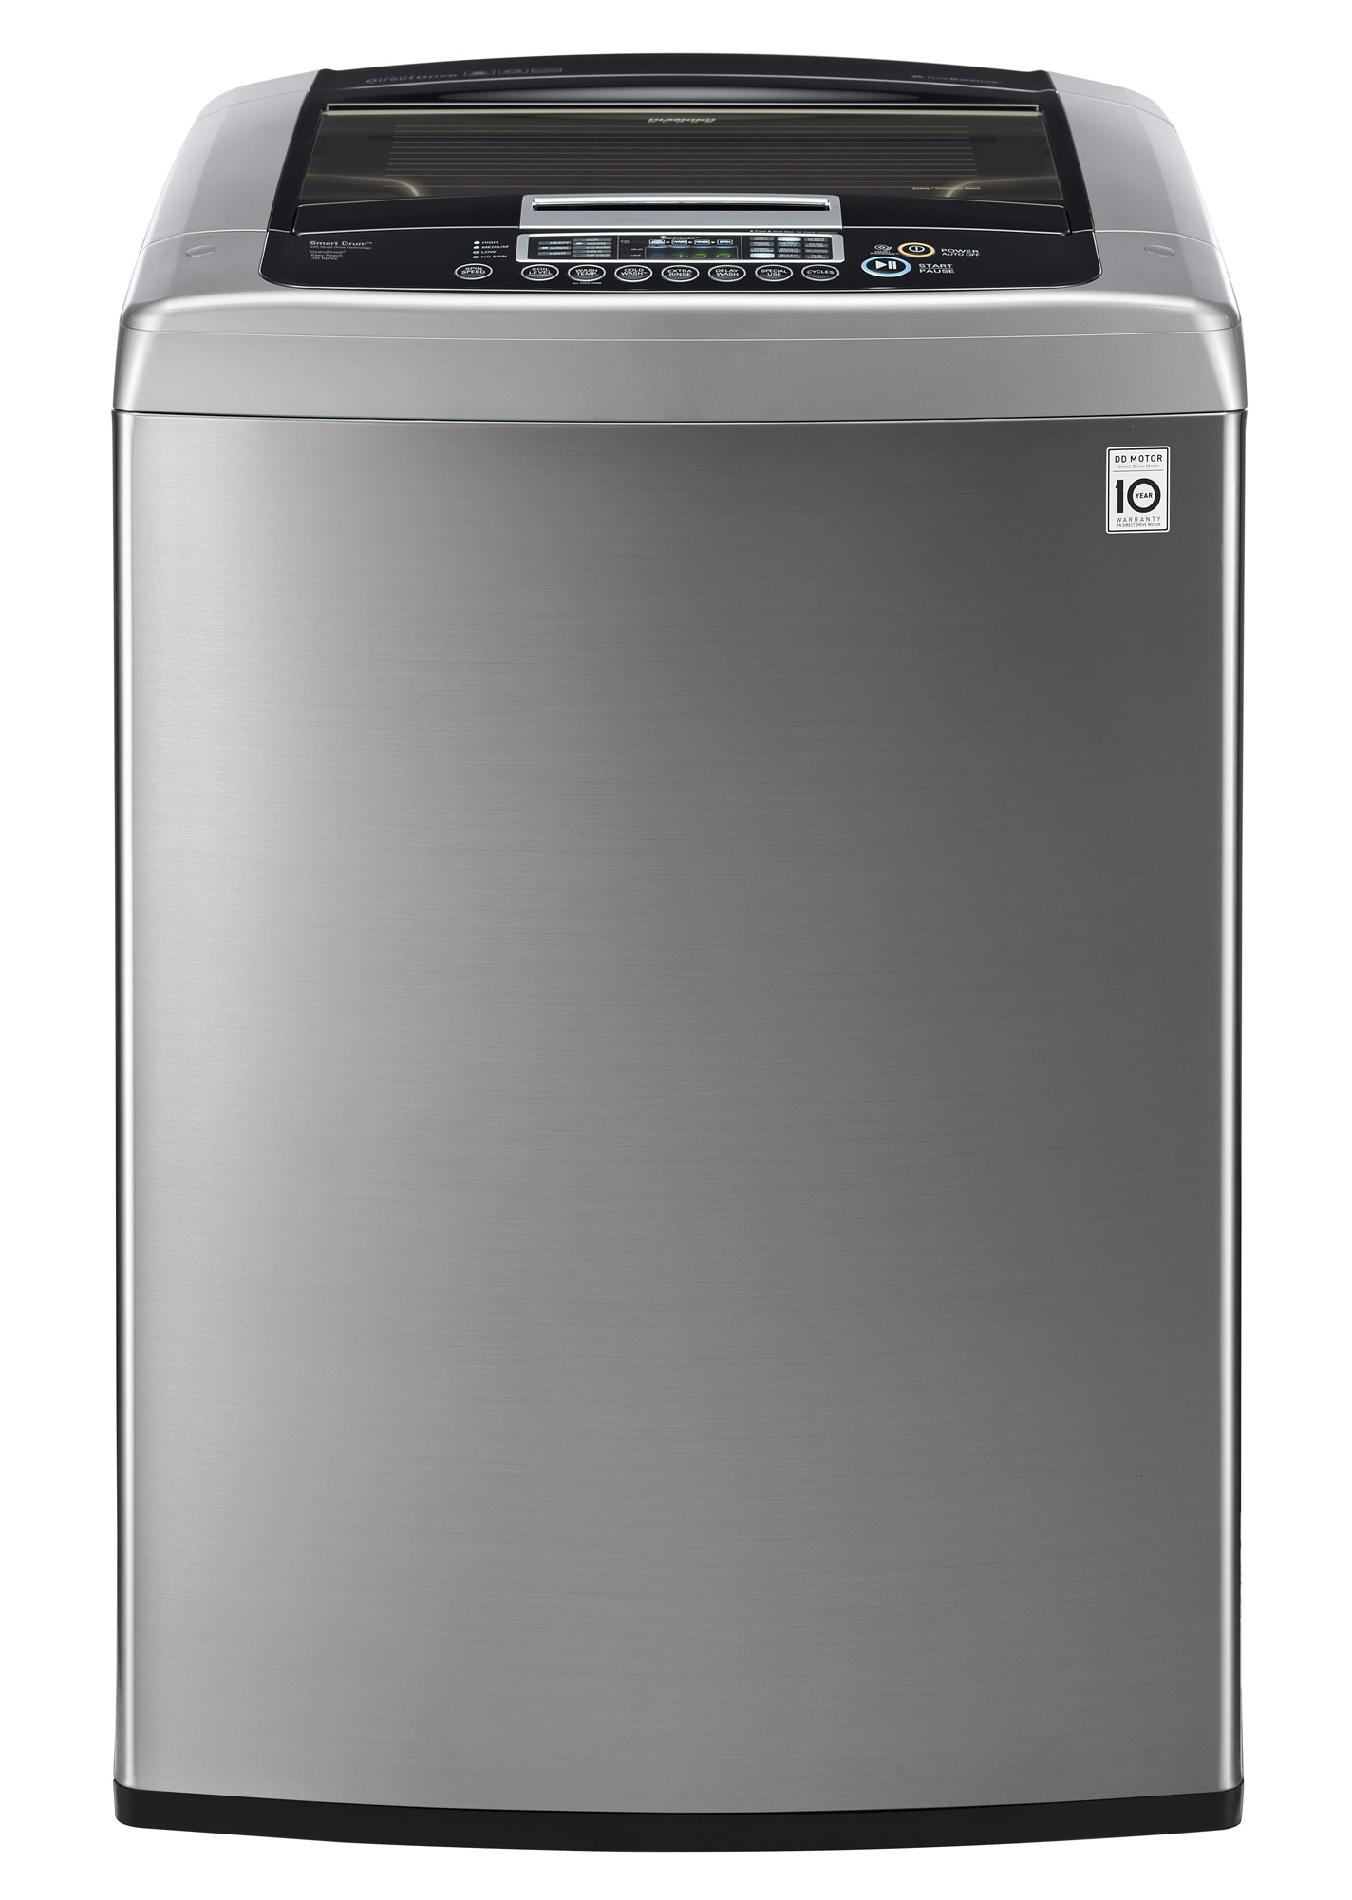 LG 4.5 cu. ft. High-Efficiency Top-Load Washer - Graphite Steel